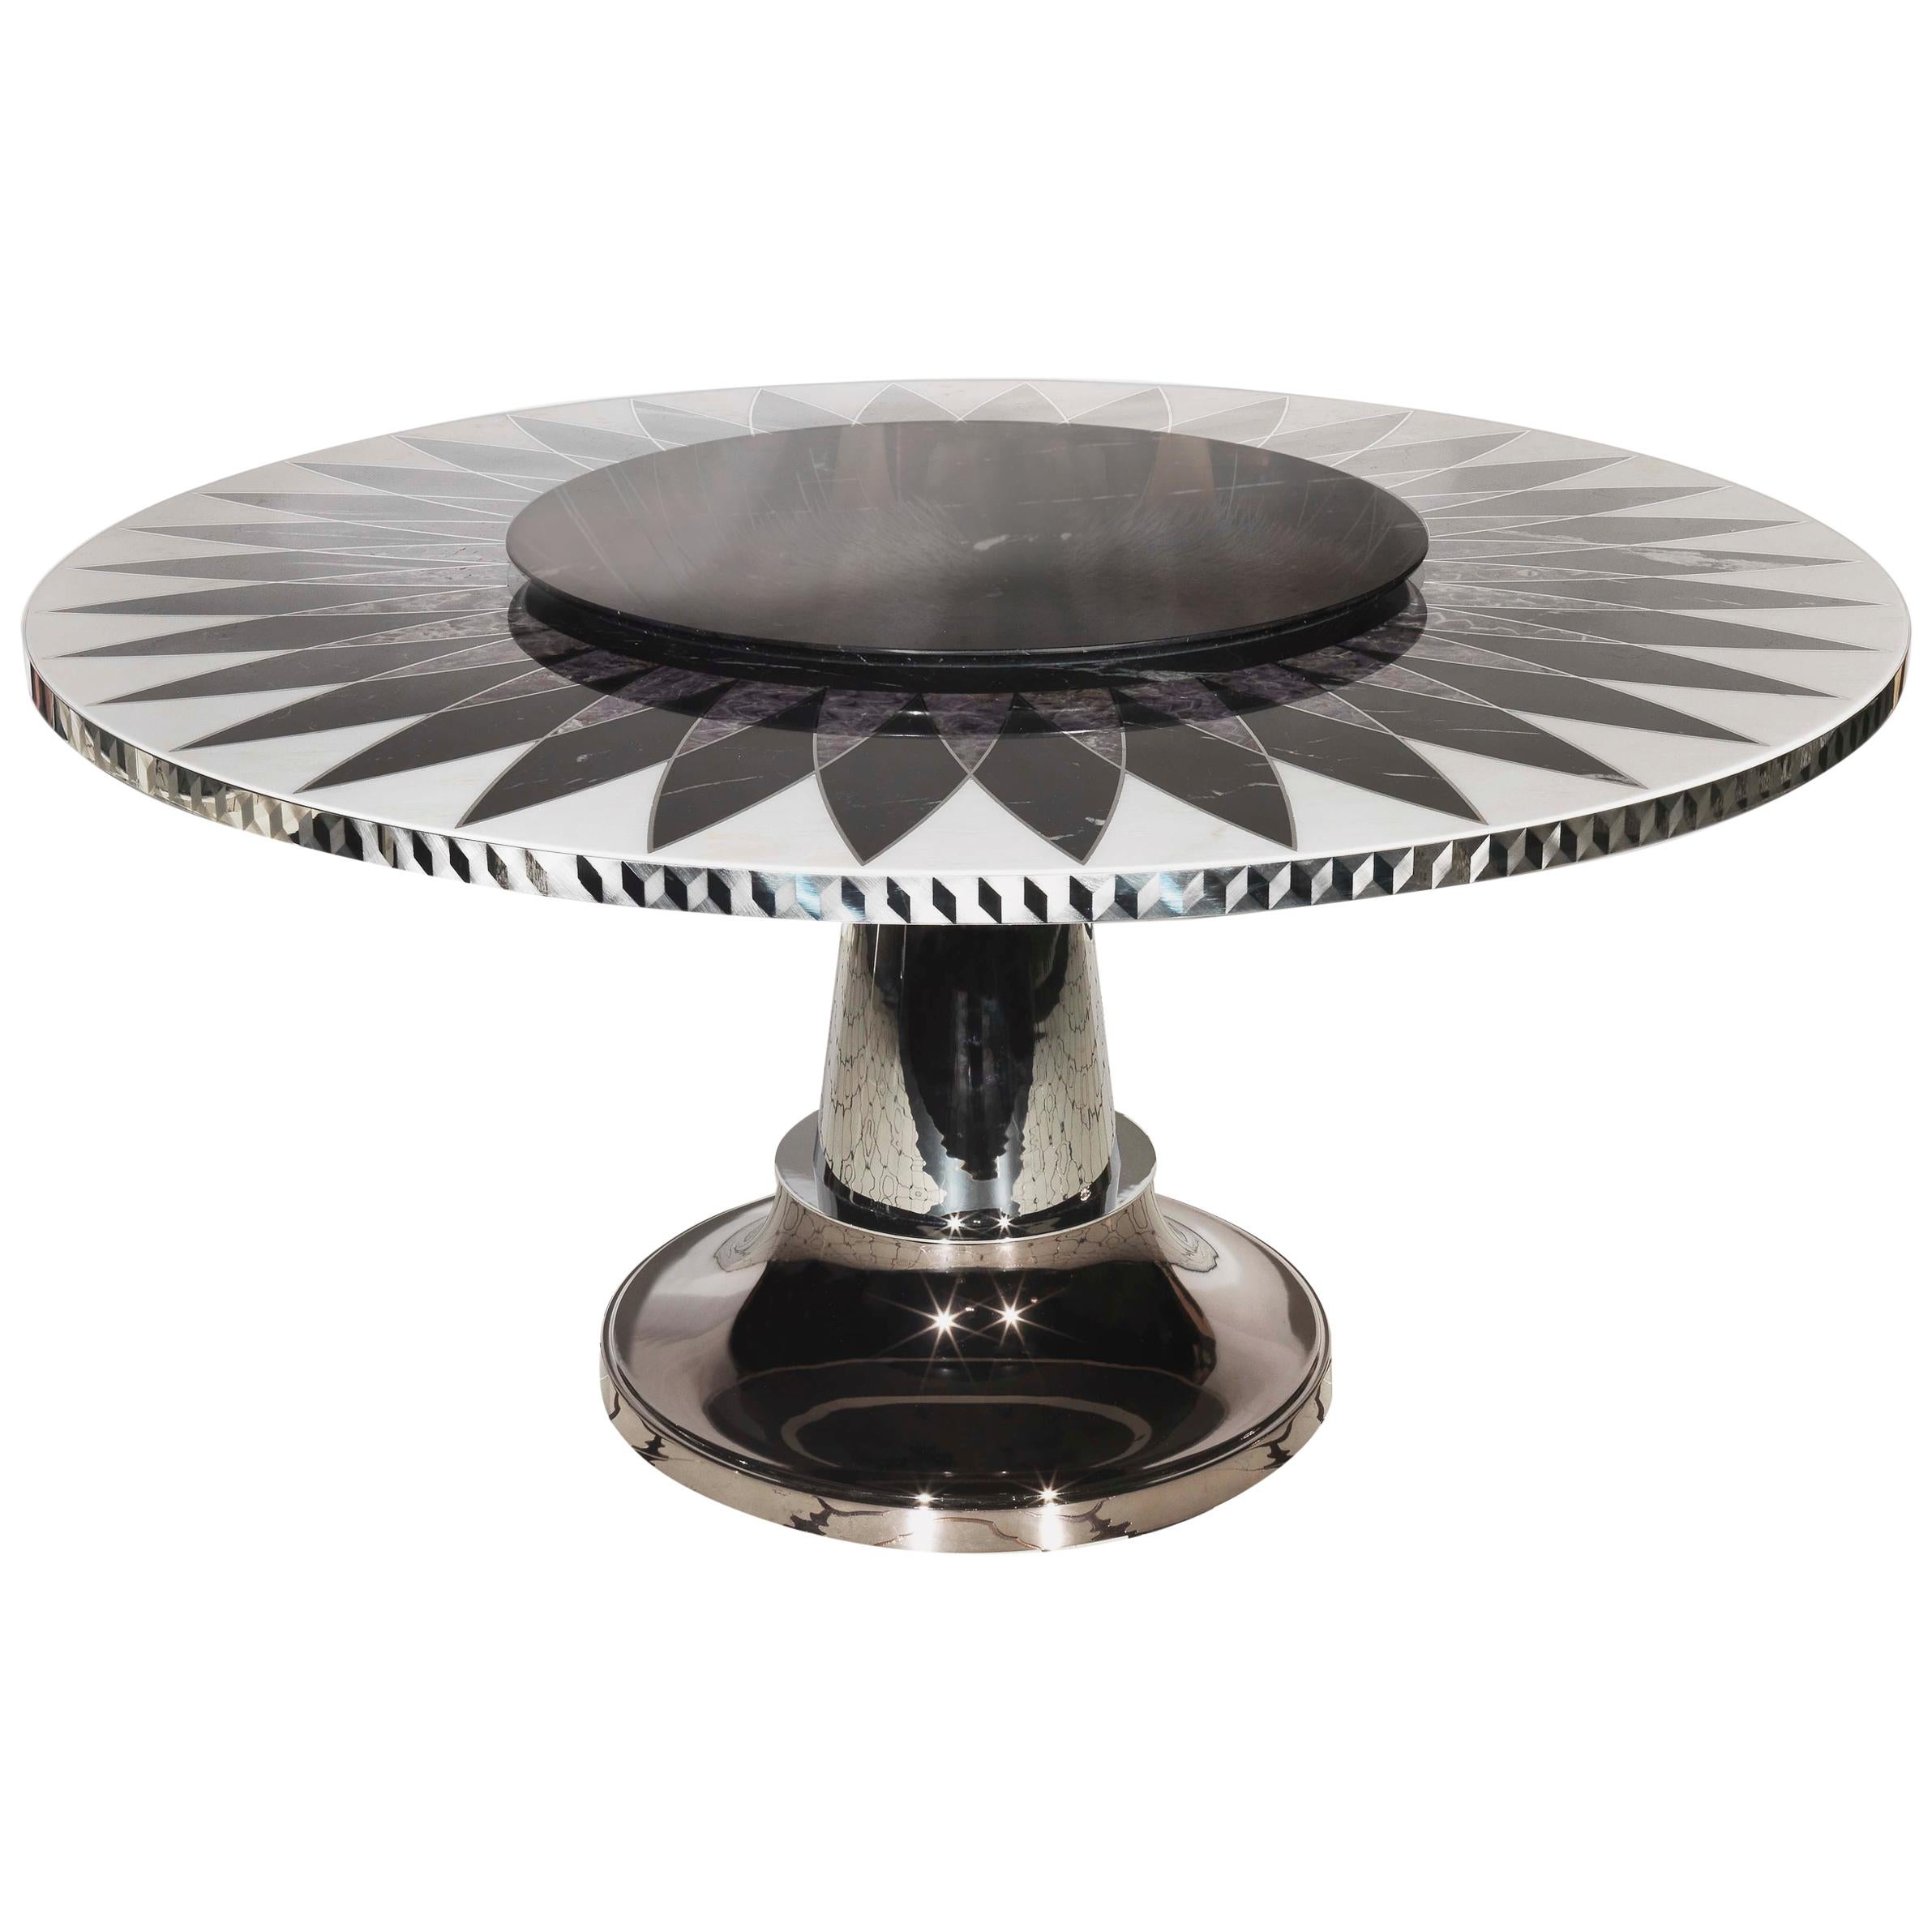 Visionnaire Raidho Dining Table in Marble and Chromed Metal Base by Steve Leung